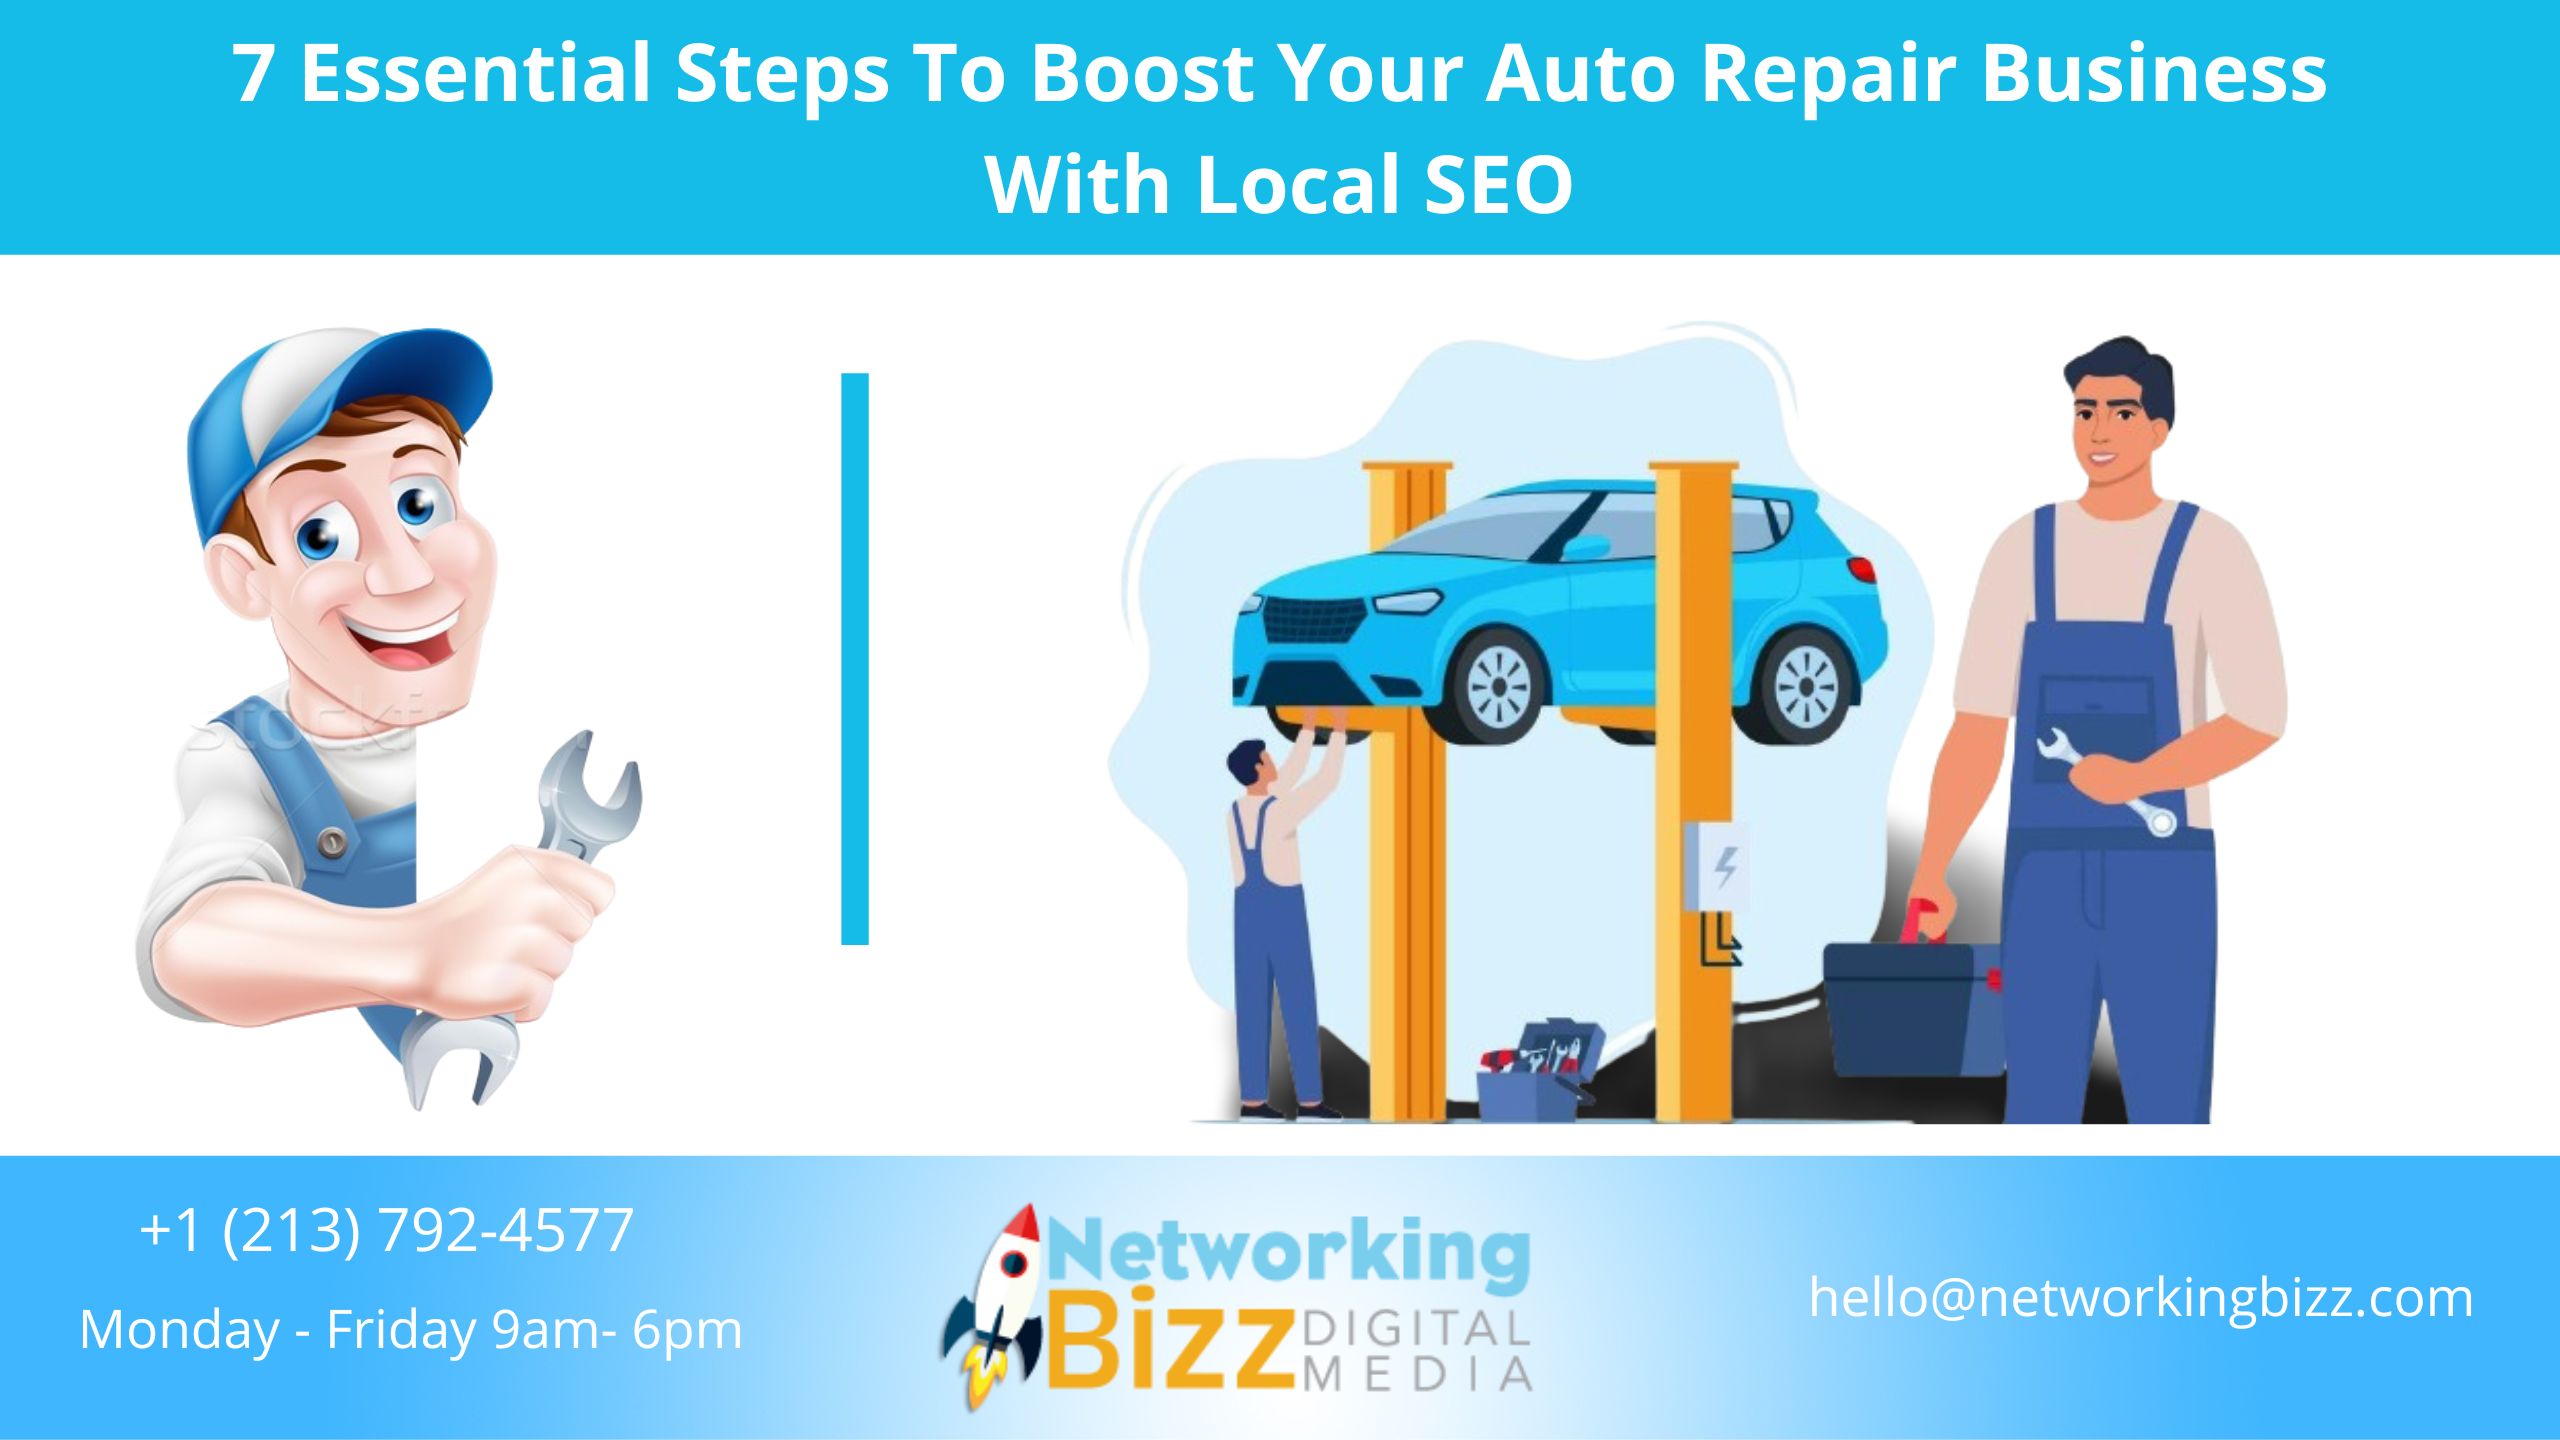 7 Essential Steps To Boost Your Auto Repair Business With Local SEO